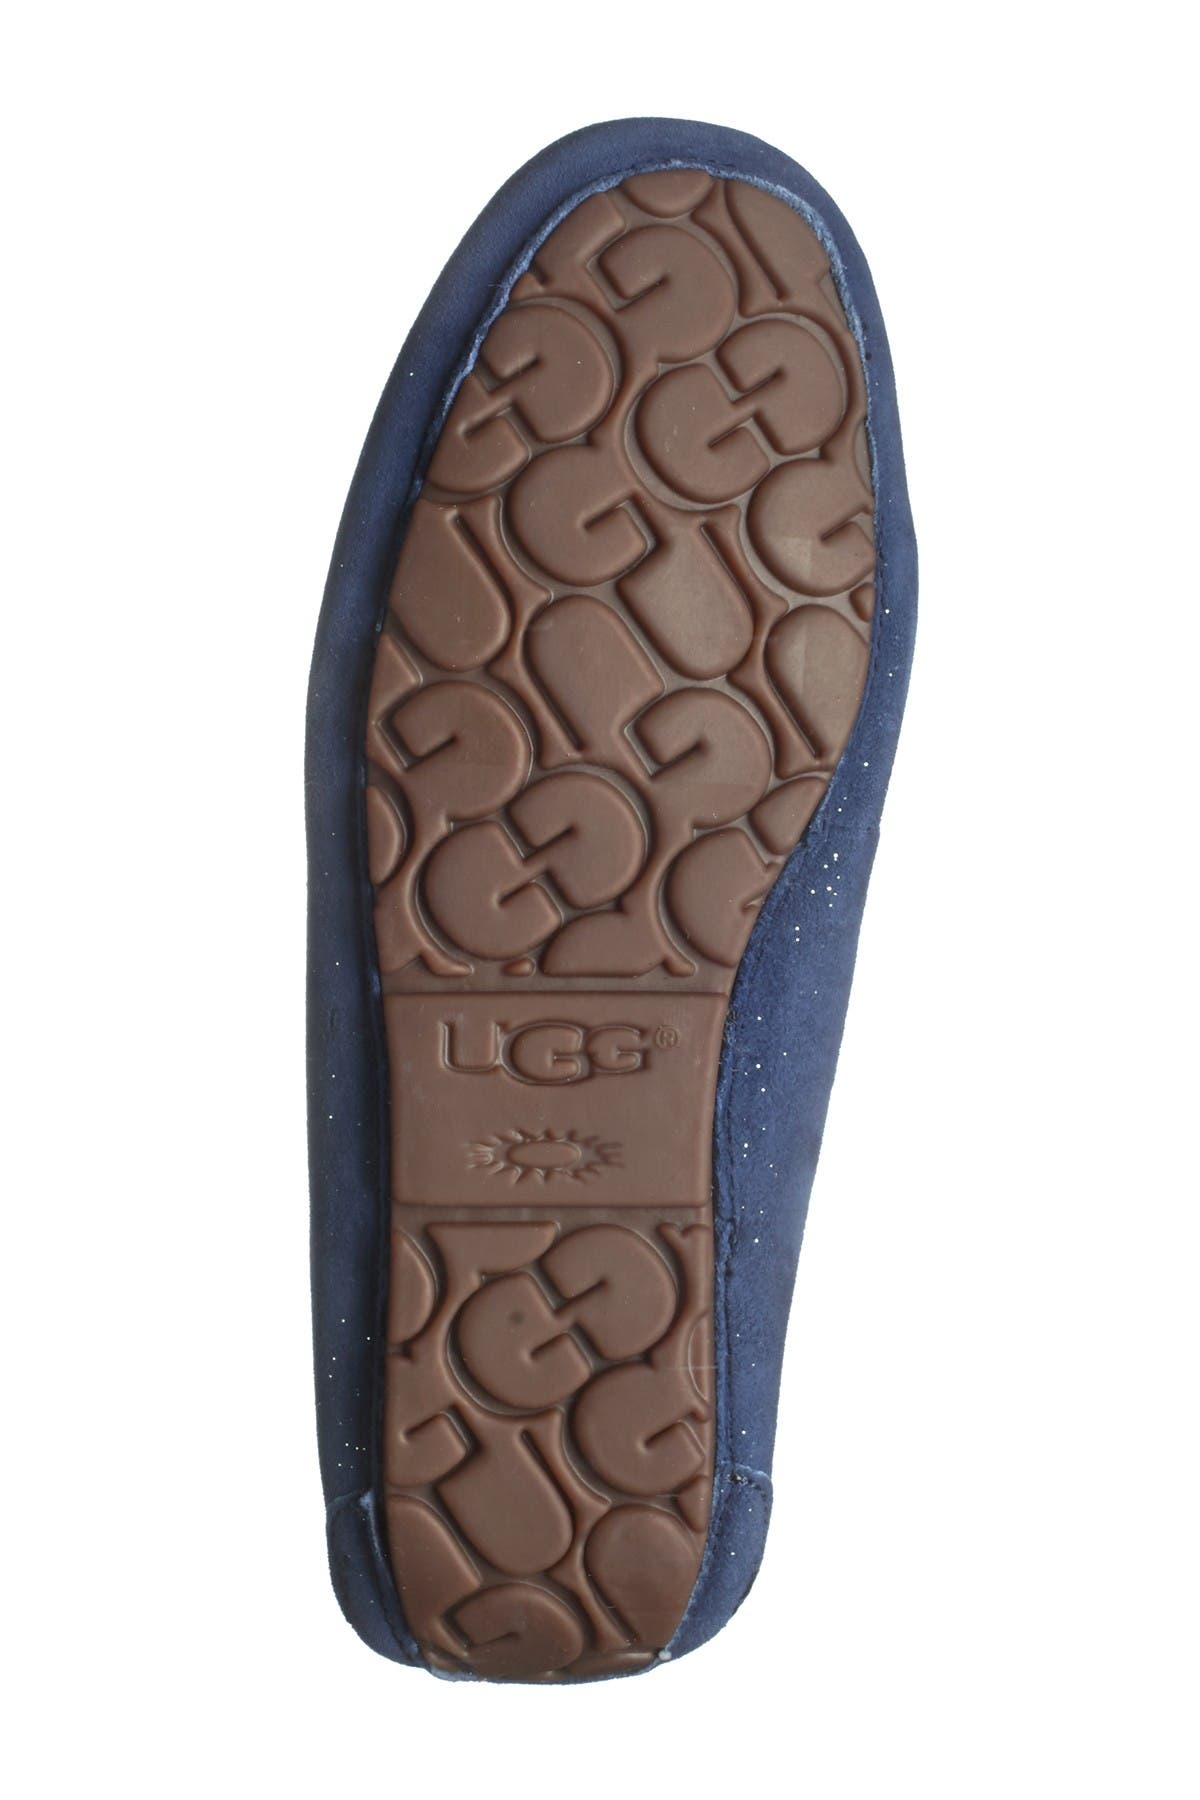 ansley milky way ugg slippers